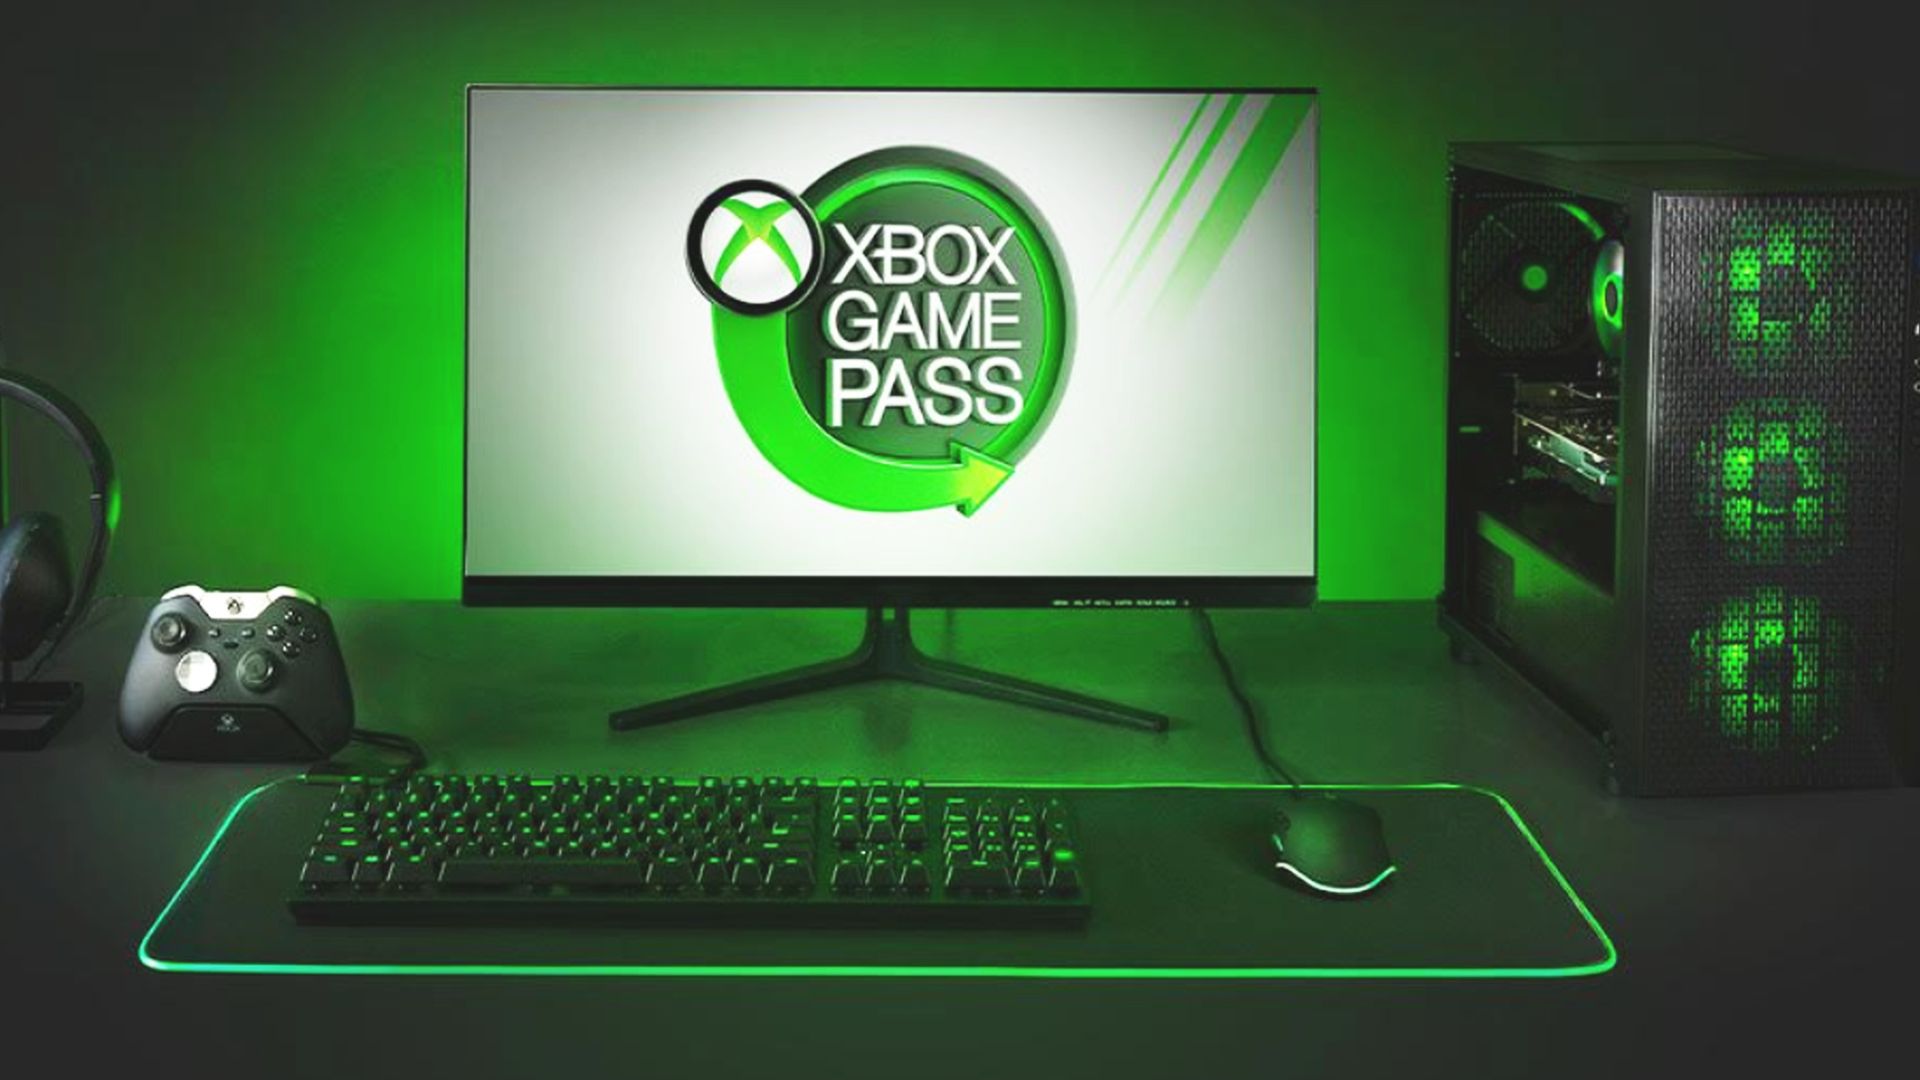 Imitatie zadel excuus How to transfer your Xbox Game Pass PC saves to Steam | PCGamesN